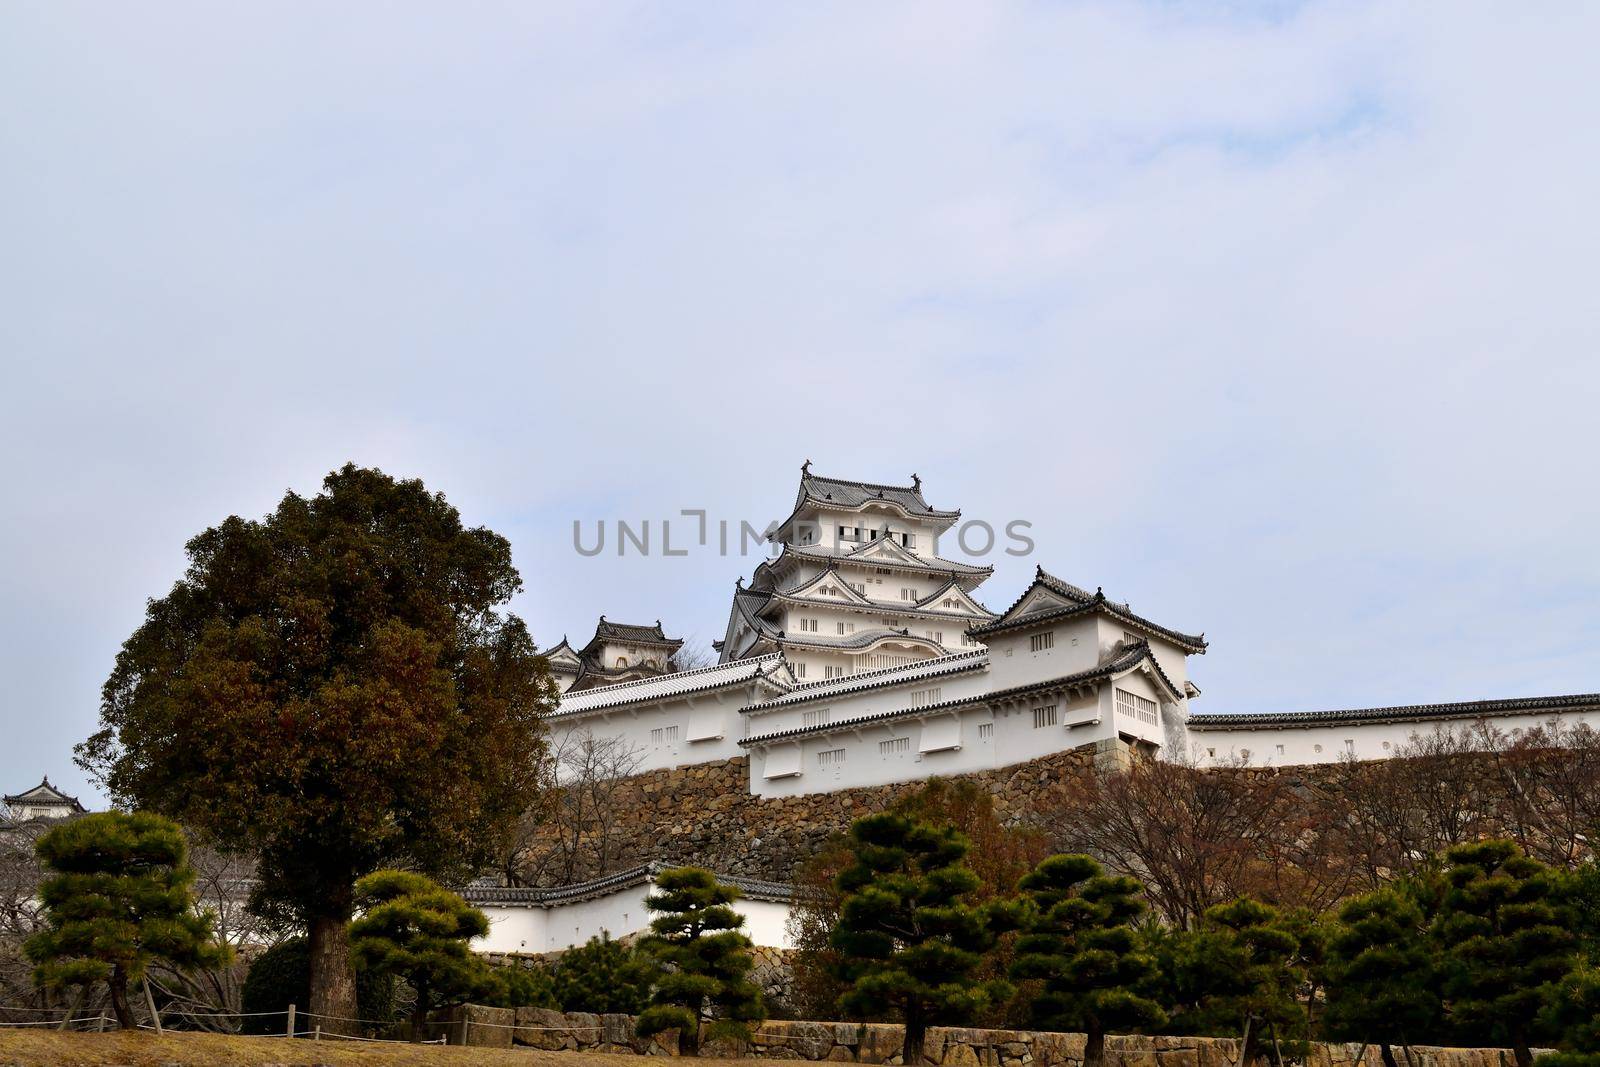 View of the Himeji castle during the winter season by silentstock639